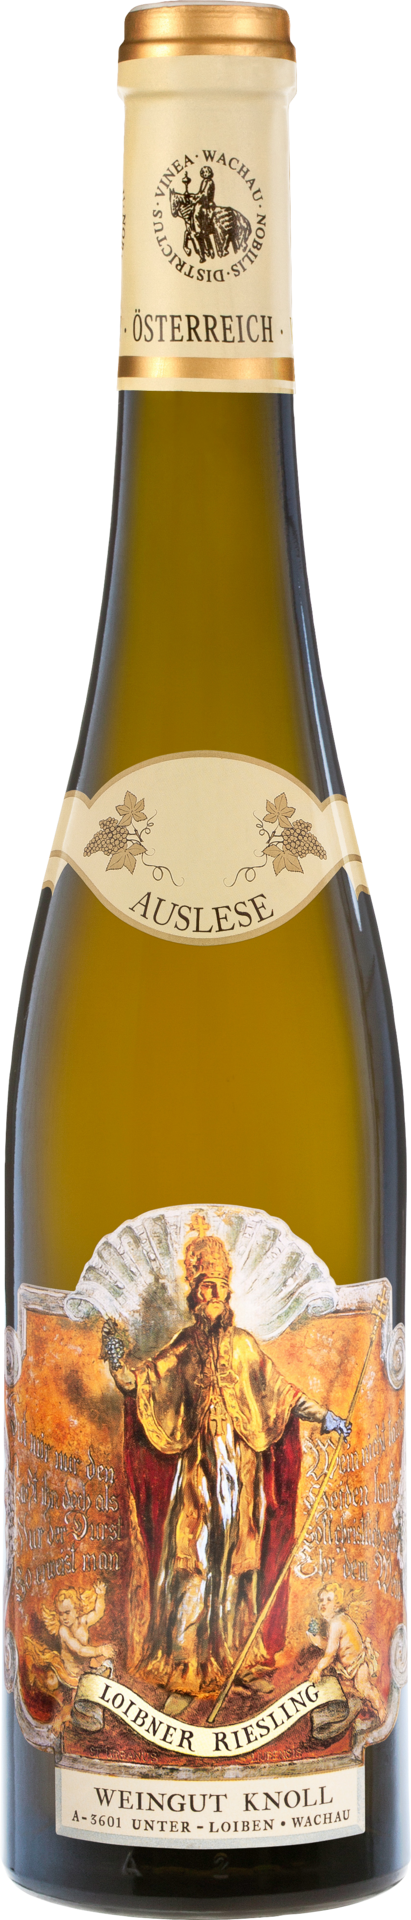 riesling Loibner Auslese 0,5L Emmerich Knoll